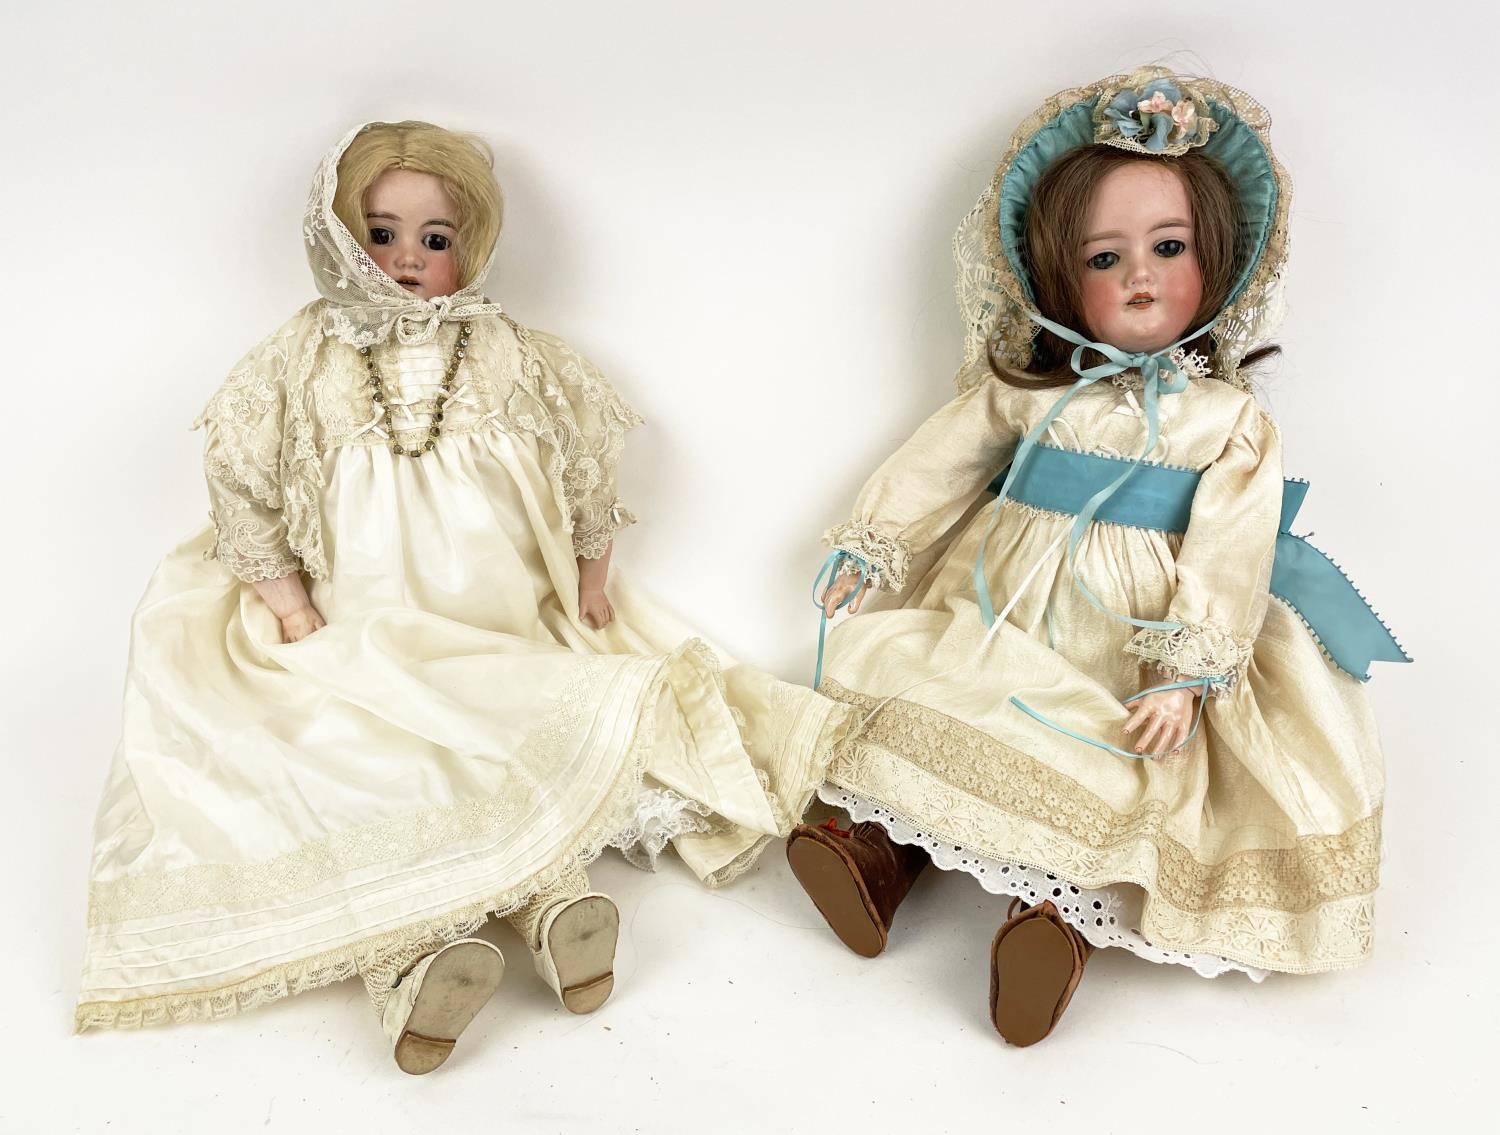 BISQUE HEAD DOLLS, two, c.1900-1910, German by Armand Marseille Kopplesdorf. (2) - Image 6 of 10